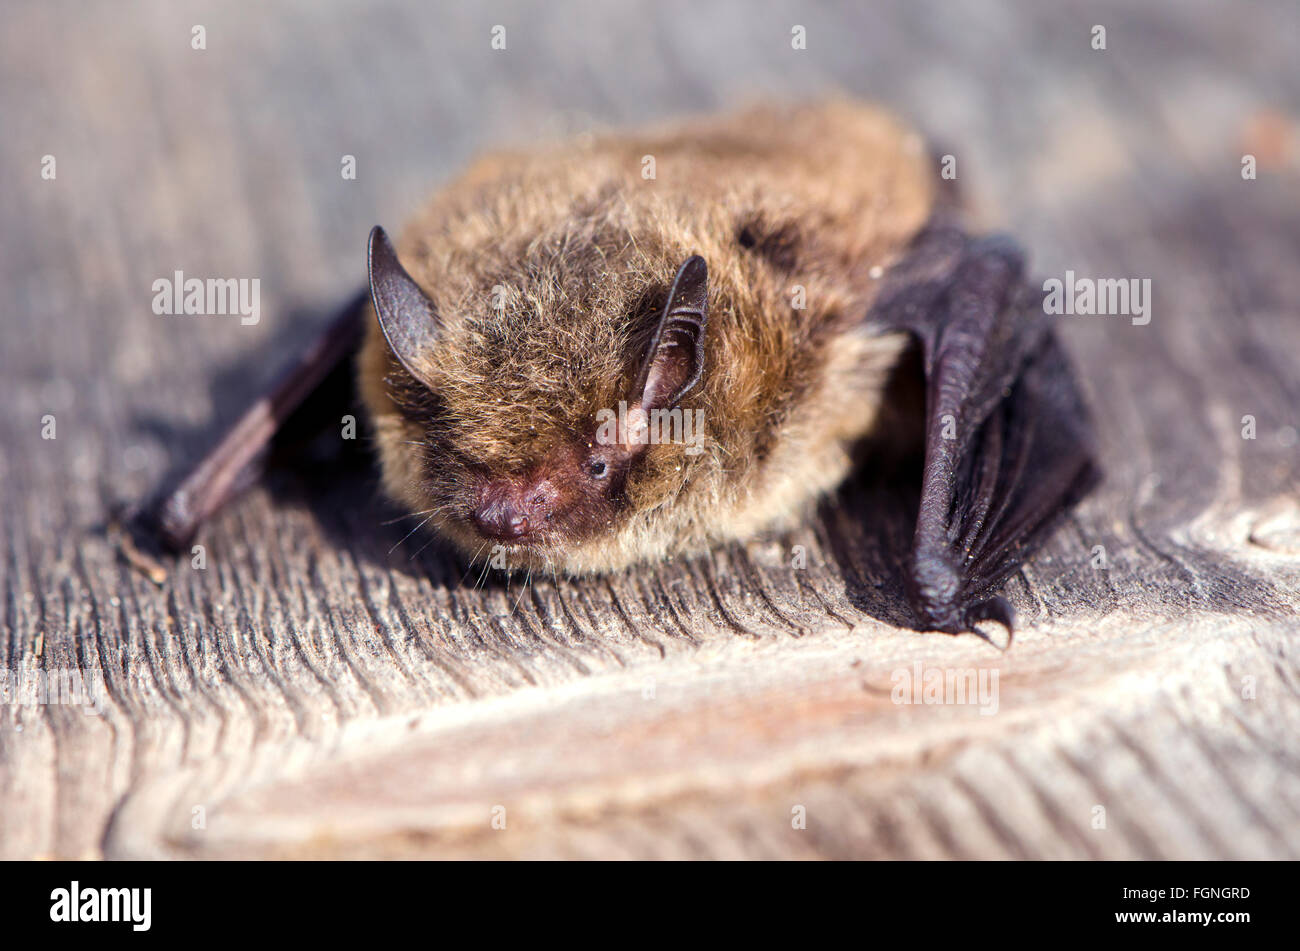 Close up of Nathusius' pipistrelle bat on sunny day on wooden plank Stock Photo